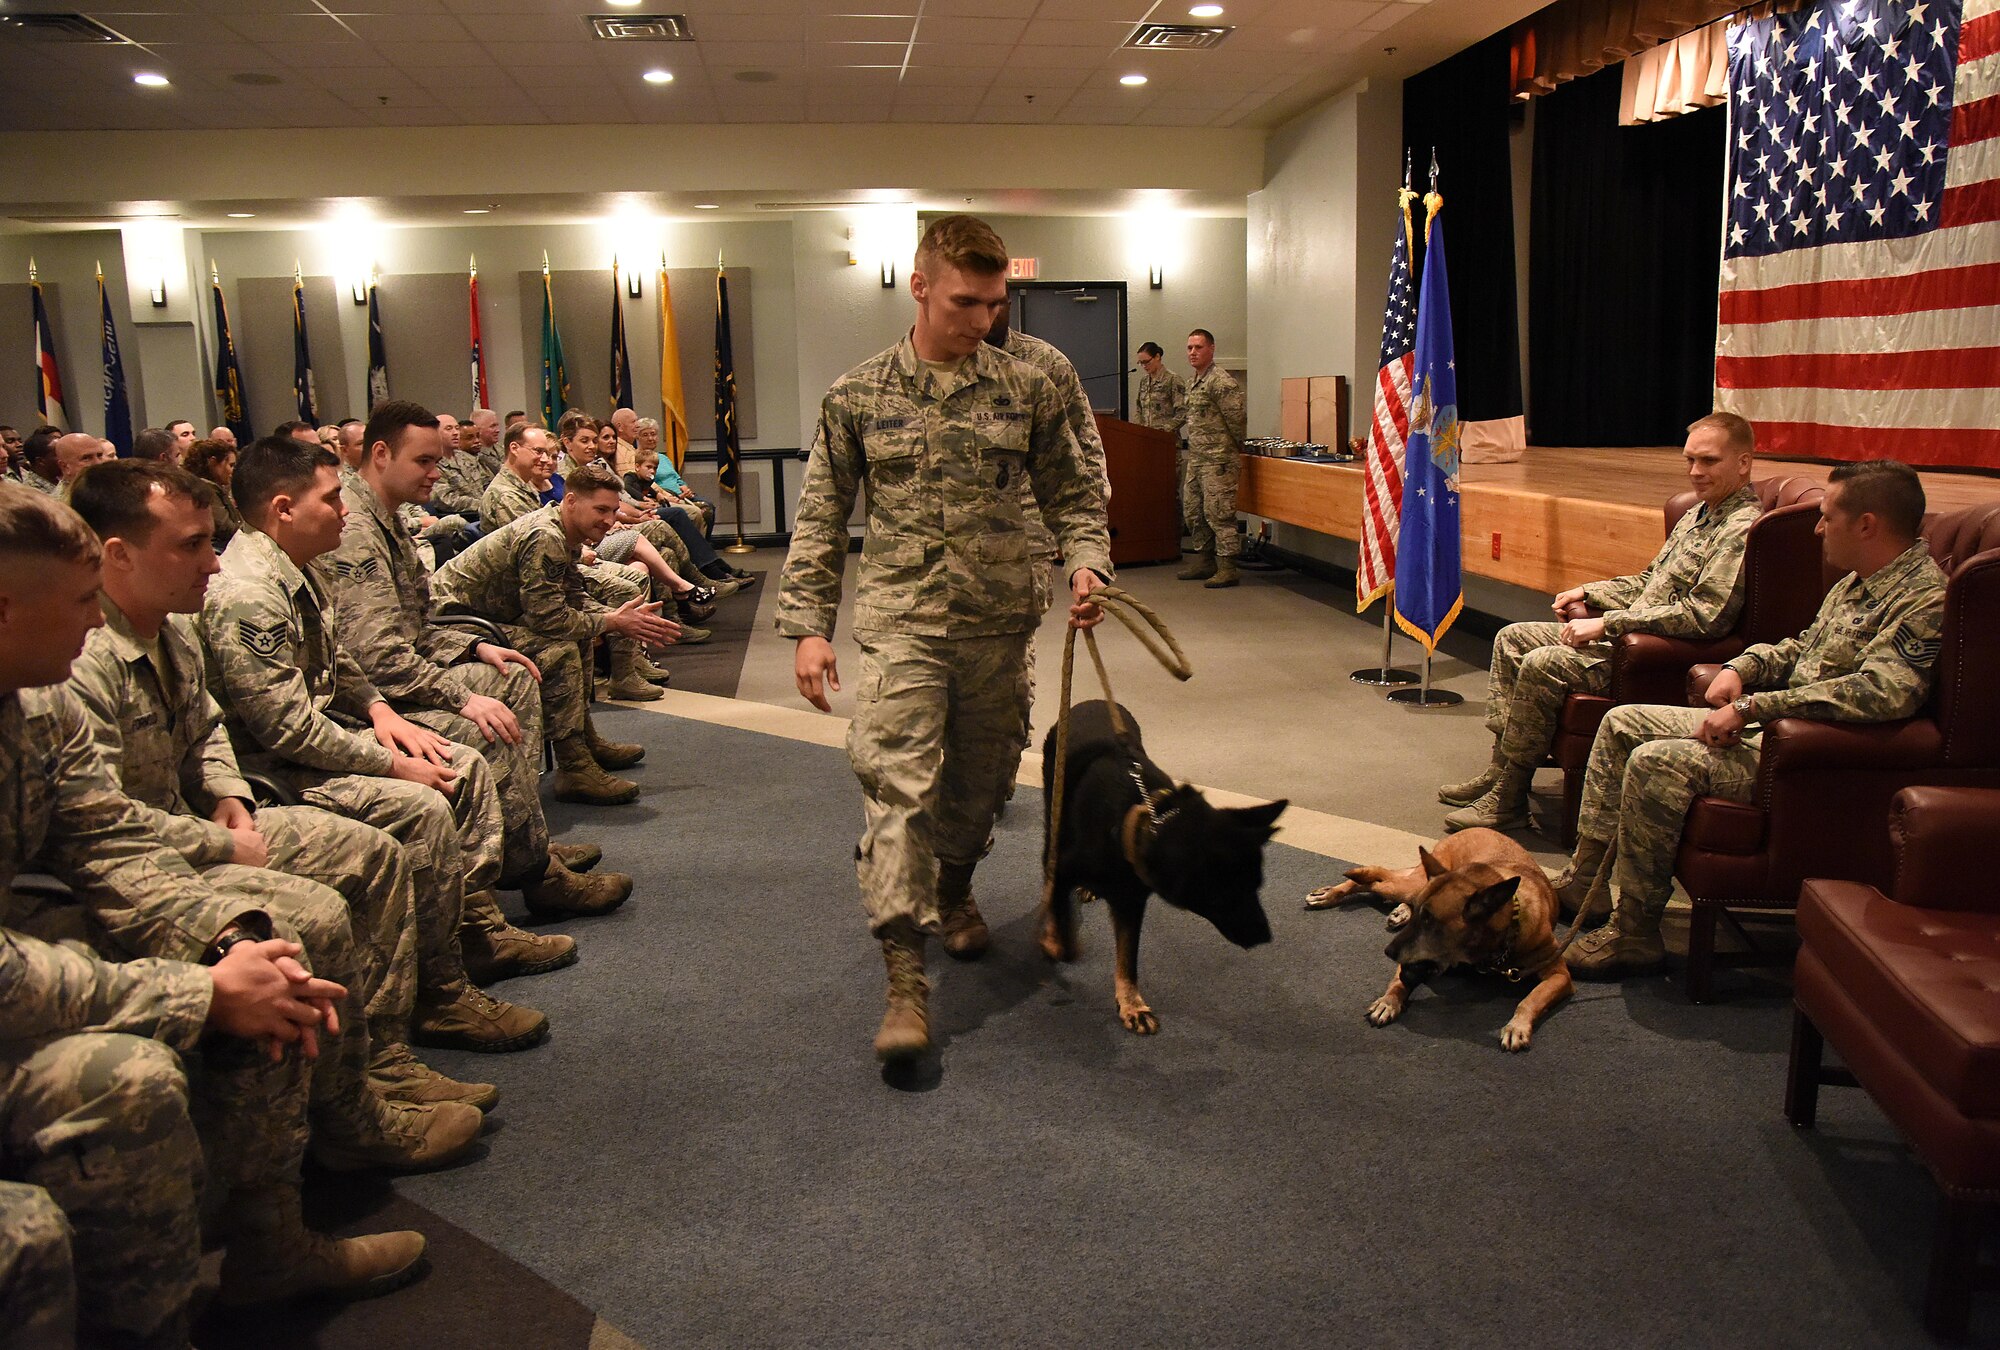 Staff Sgt. Jordan Leiter, 81st Security Forces Squadron military working dog handler, escorts Ares, 81st SFS military working dog, back to their seats during Ares’ retirement ceremony at the Keesler Medical Center Don Wylie Auditorium Dec. 2, 2016, on Keesler Air Force Base, Miss. Ares served more than eight years in the Air Force. After serving together for two years, to include one deployment, Leiter adopted Ares. (U.S. Air Force photo by Kemberly Groue)